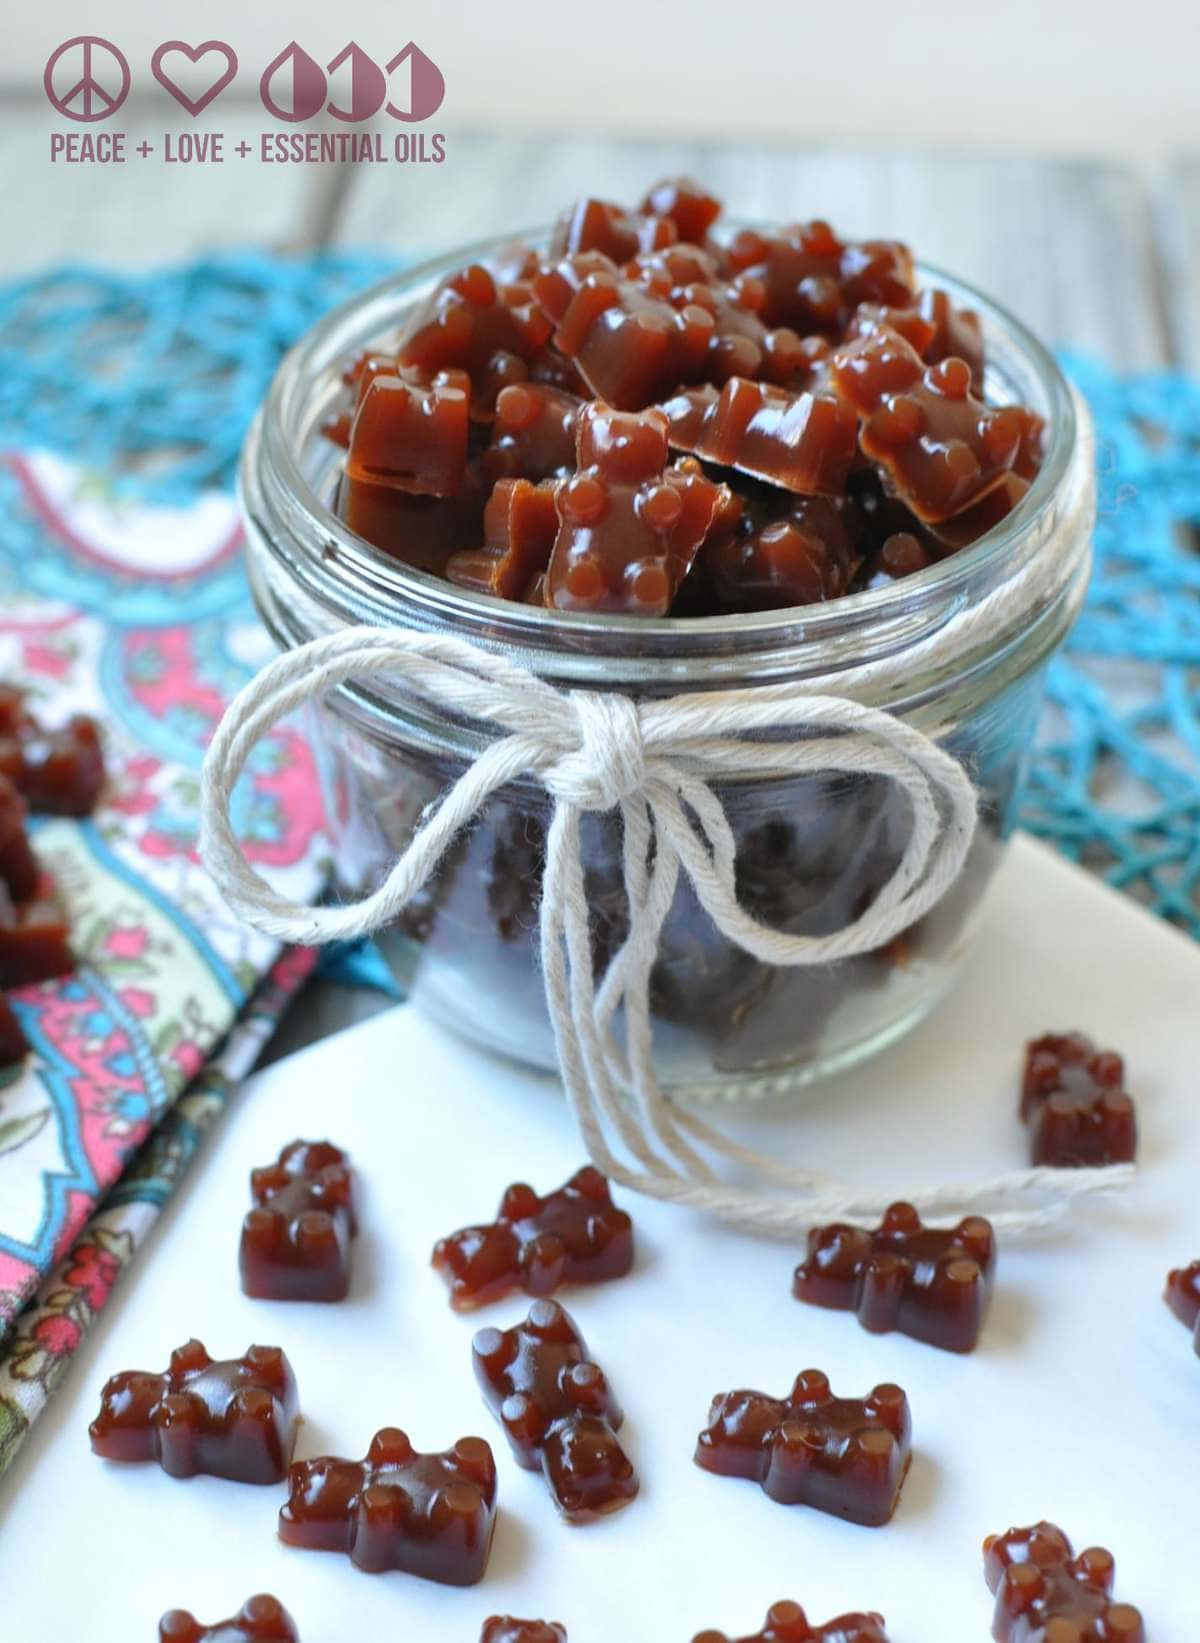 Ningxia Red Gummy Bears - Low Carb, Gluten Free